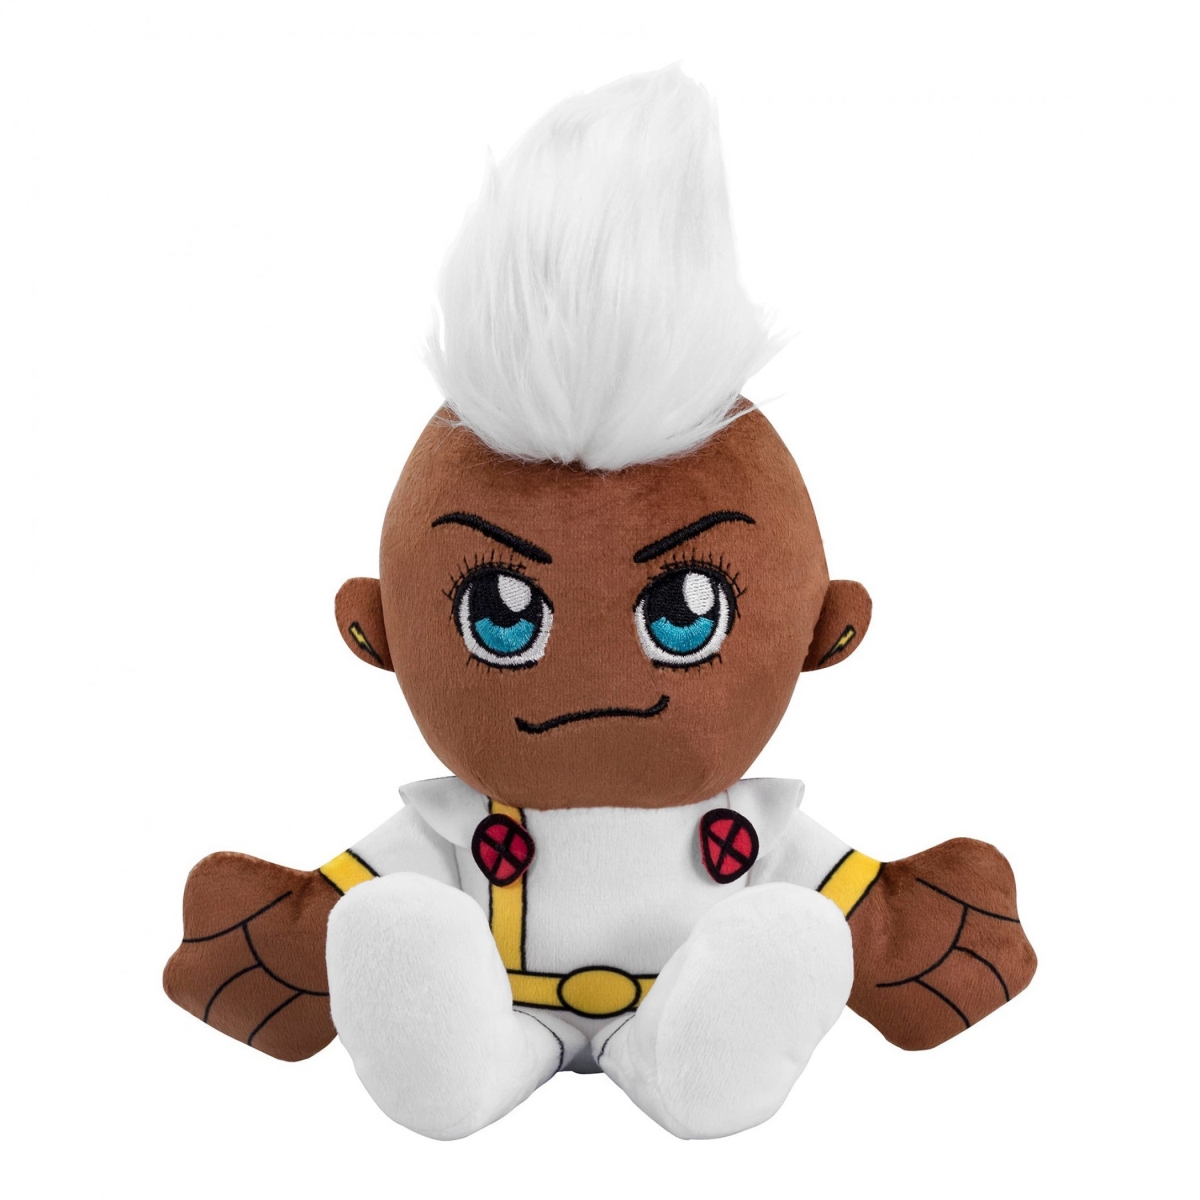 Picture of Storm 856570 8 in. Storm X-Men Kuricha Sitting Plush Doll